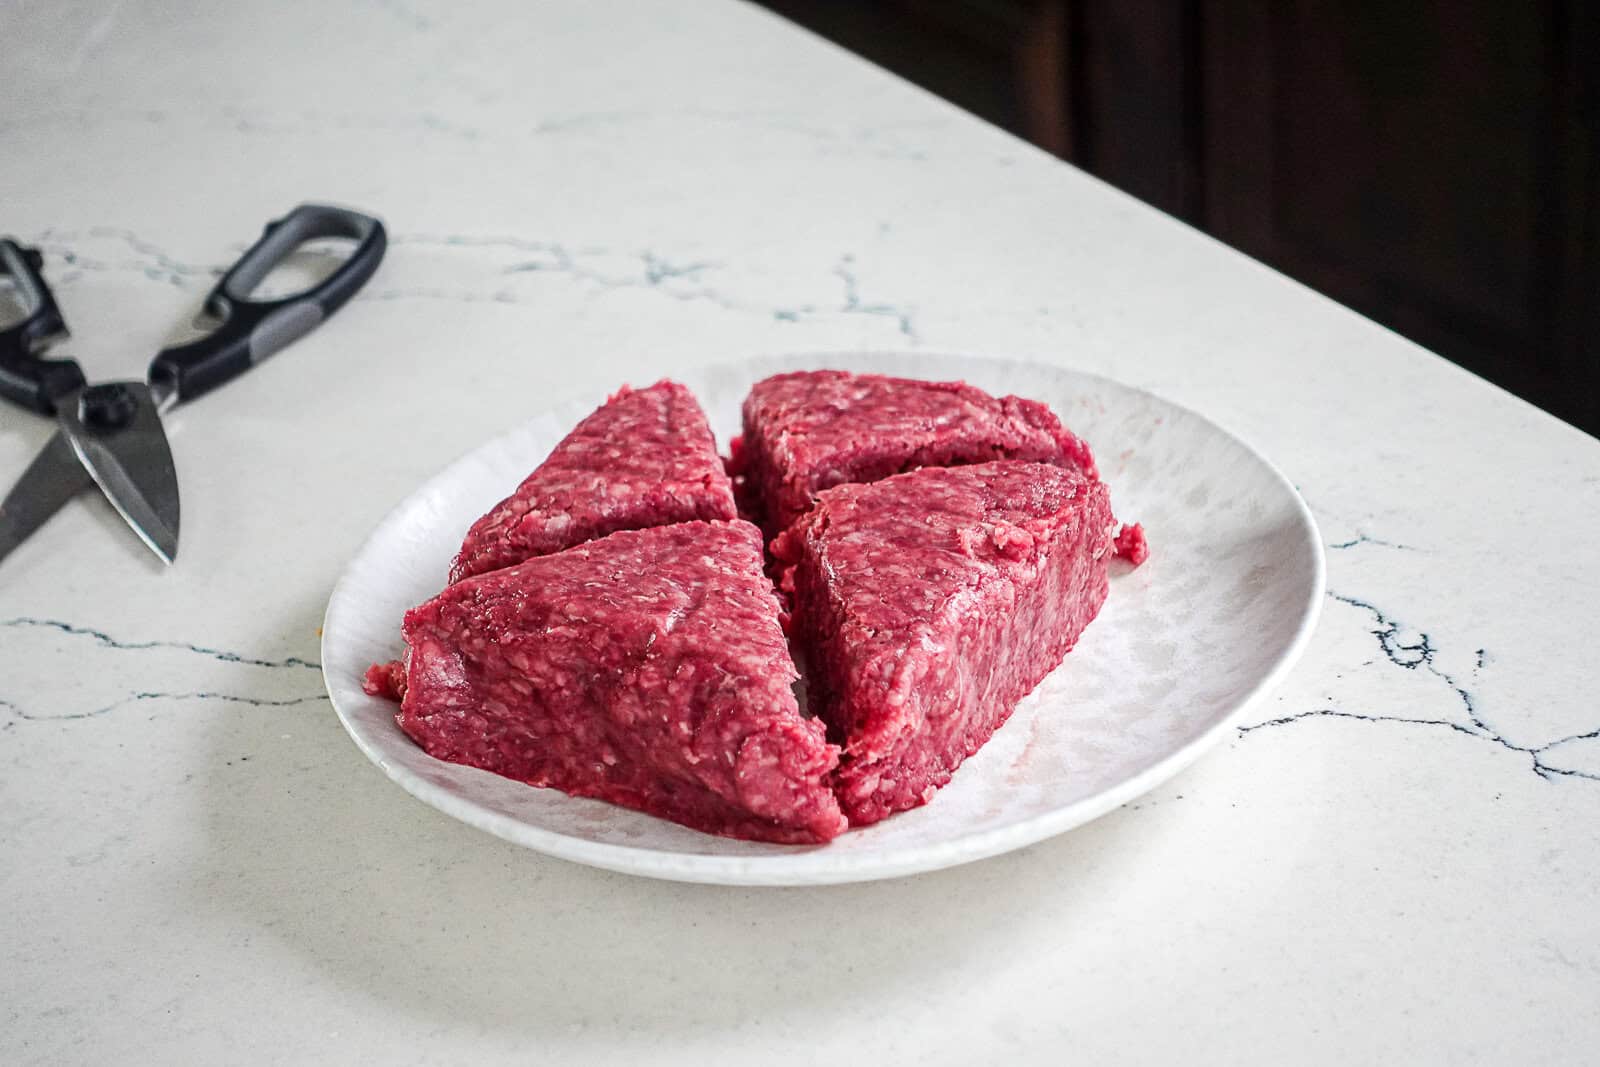 Ground burger meat divided into quarter pound sections